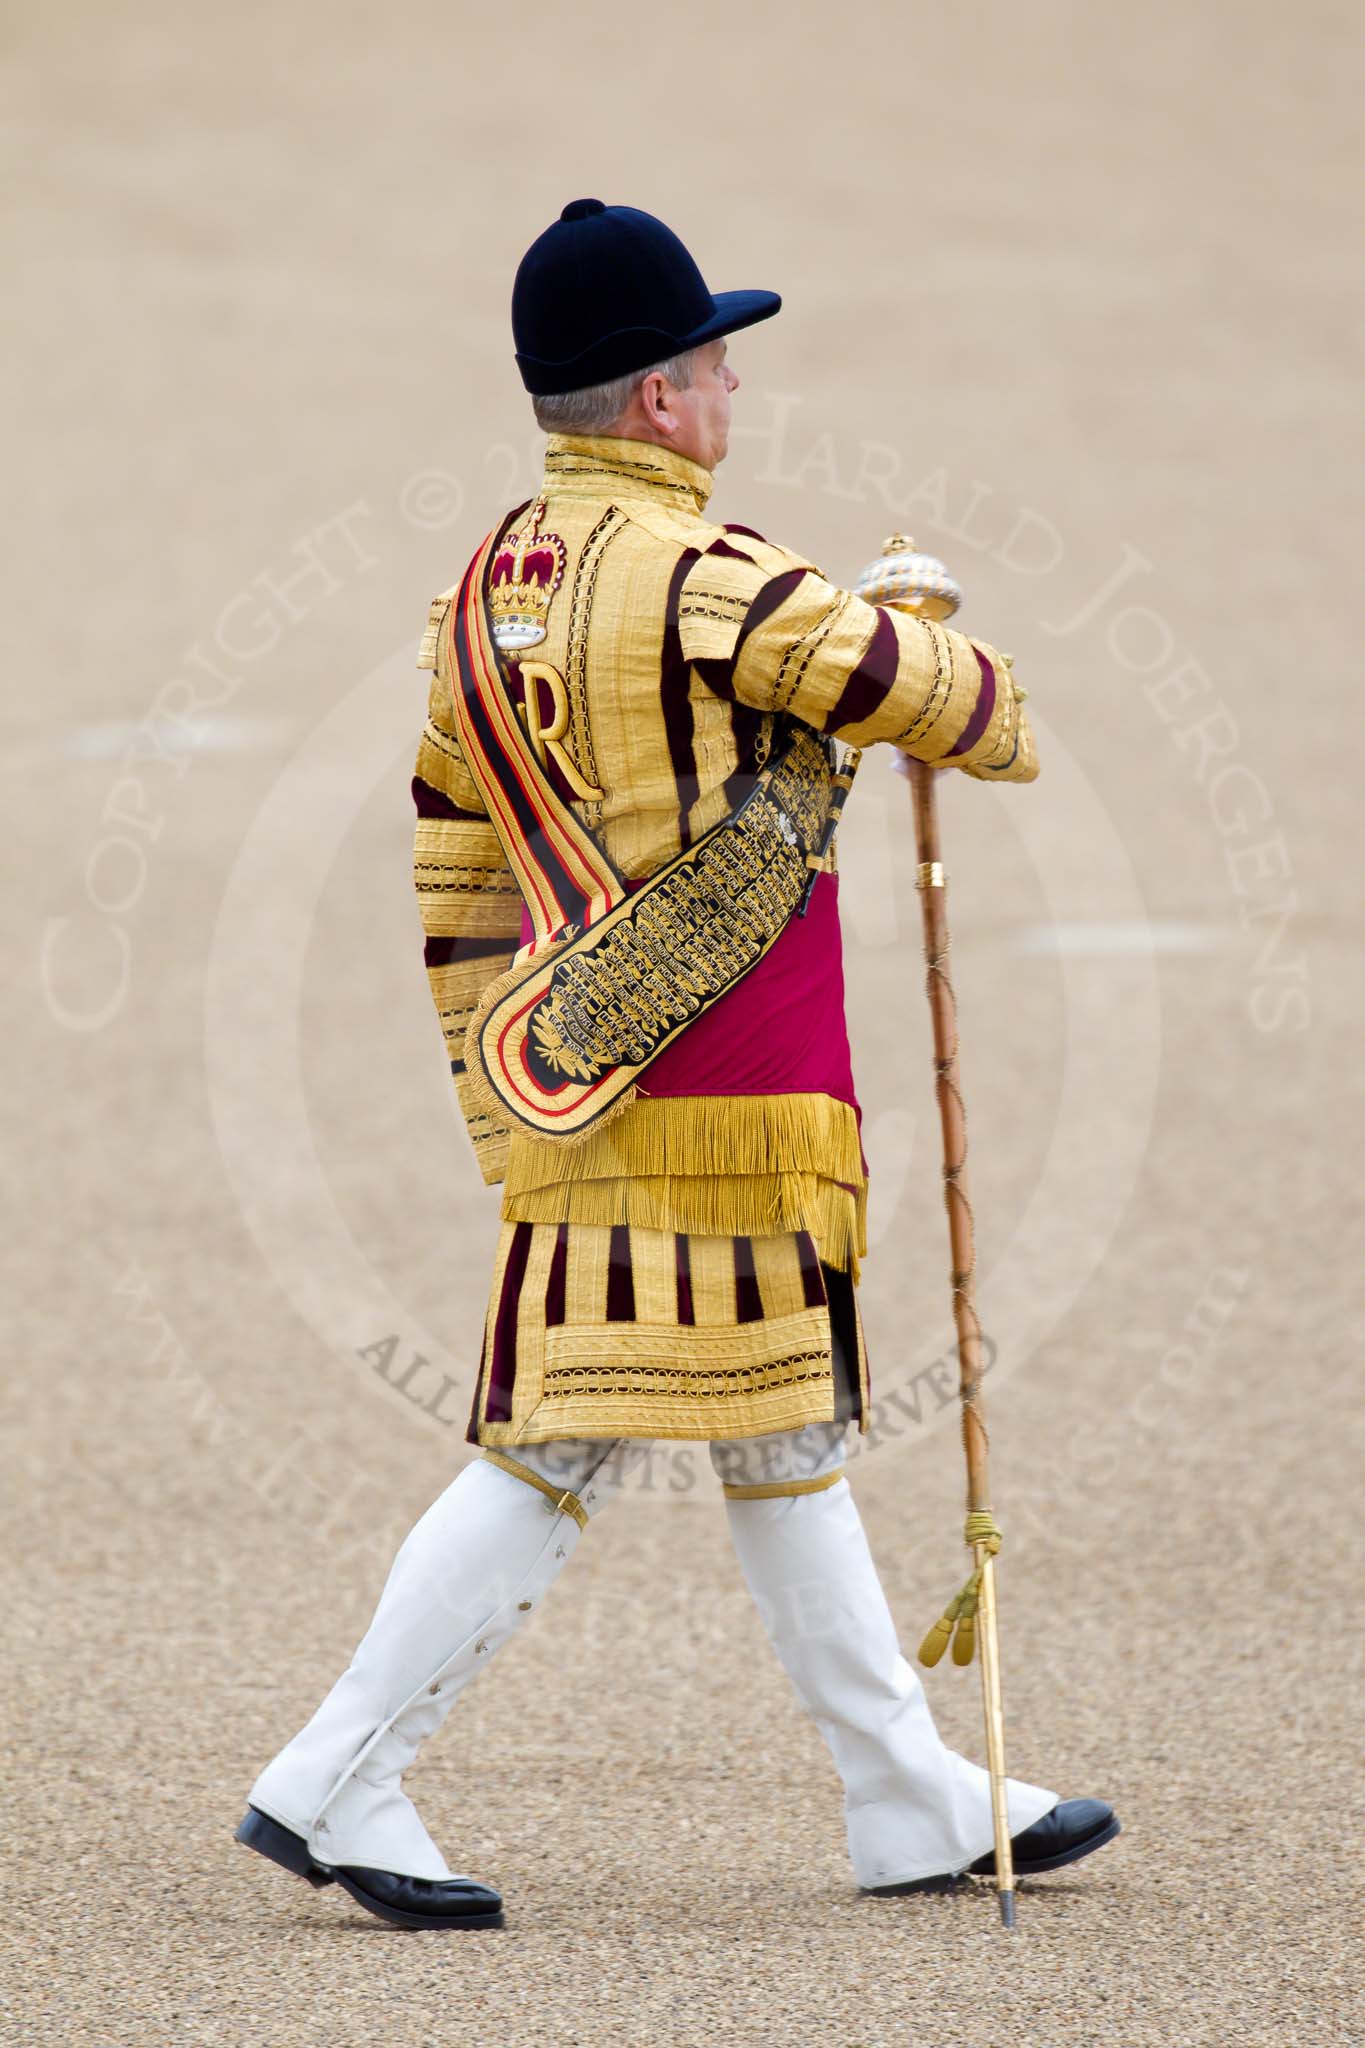 Trooping the Colour 2010: Drum Major of the Grenadier Guards during the &quot;Massed Bands Troop&quot;..
Horse Guards Parade, Westminster,
London SW1,
Greater London,
United Kingdom,
on 12 June 2010 at 11:09, image #105